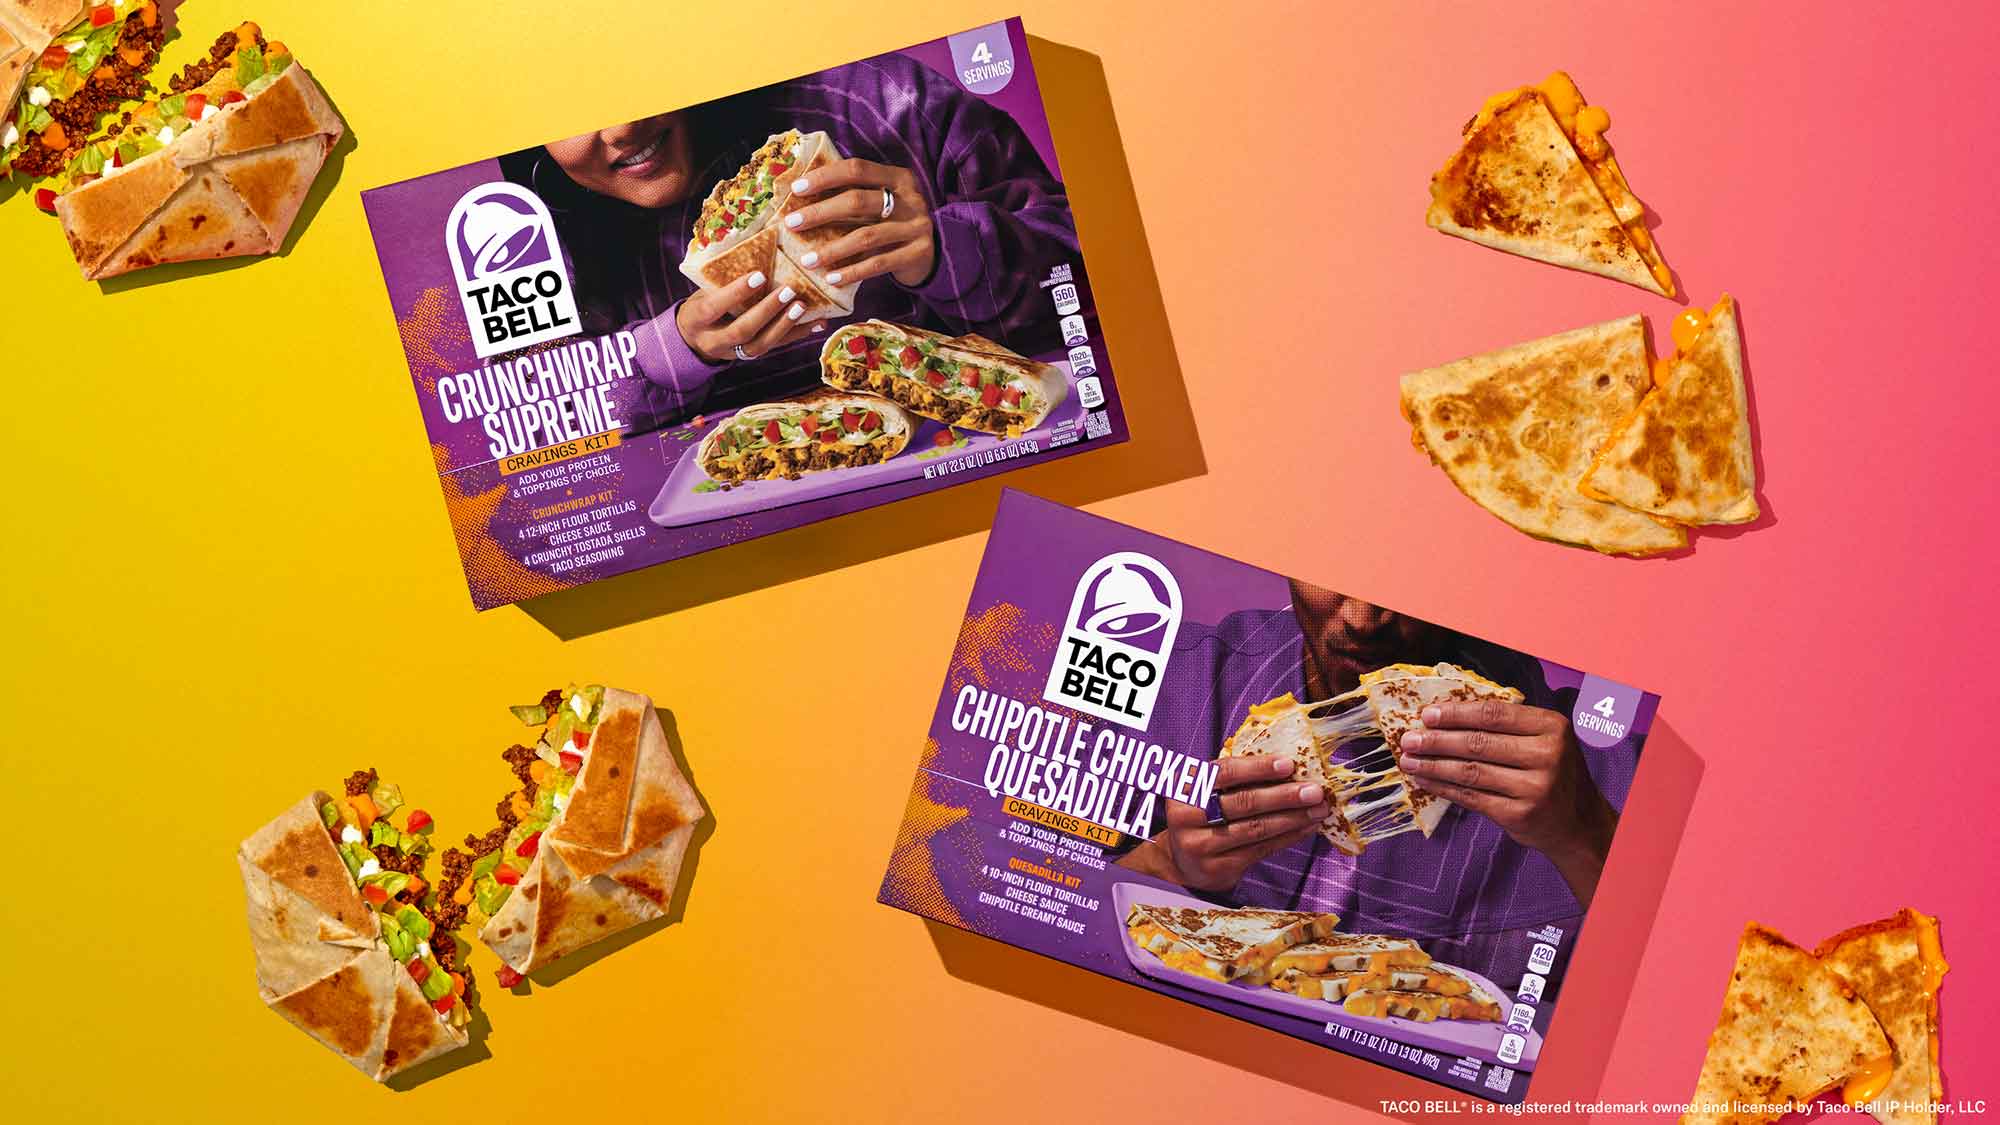 For the First Time Ever, Fans Can Make a Taco Bell Approved Crunchwrap Supreme and Chipotle Chicken Quesadilla at Home